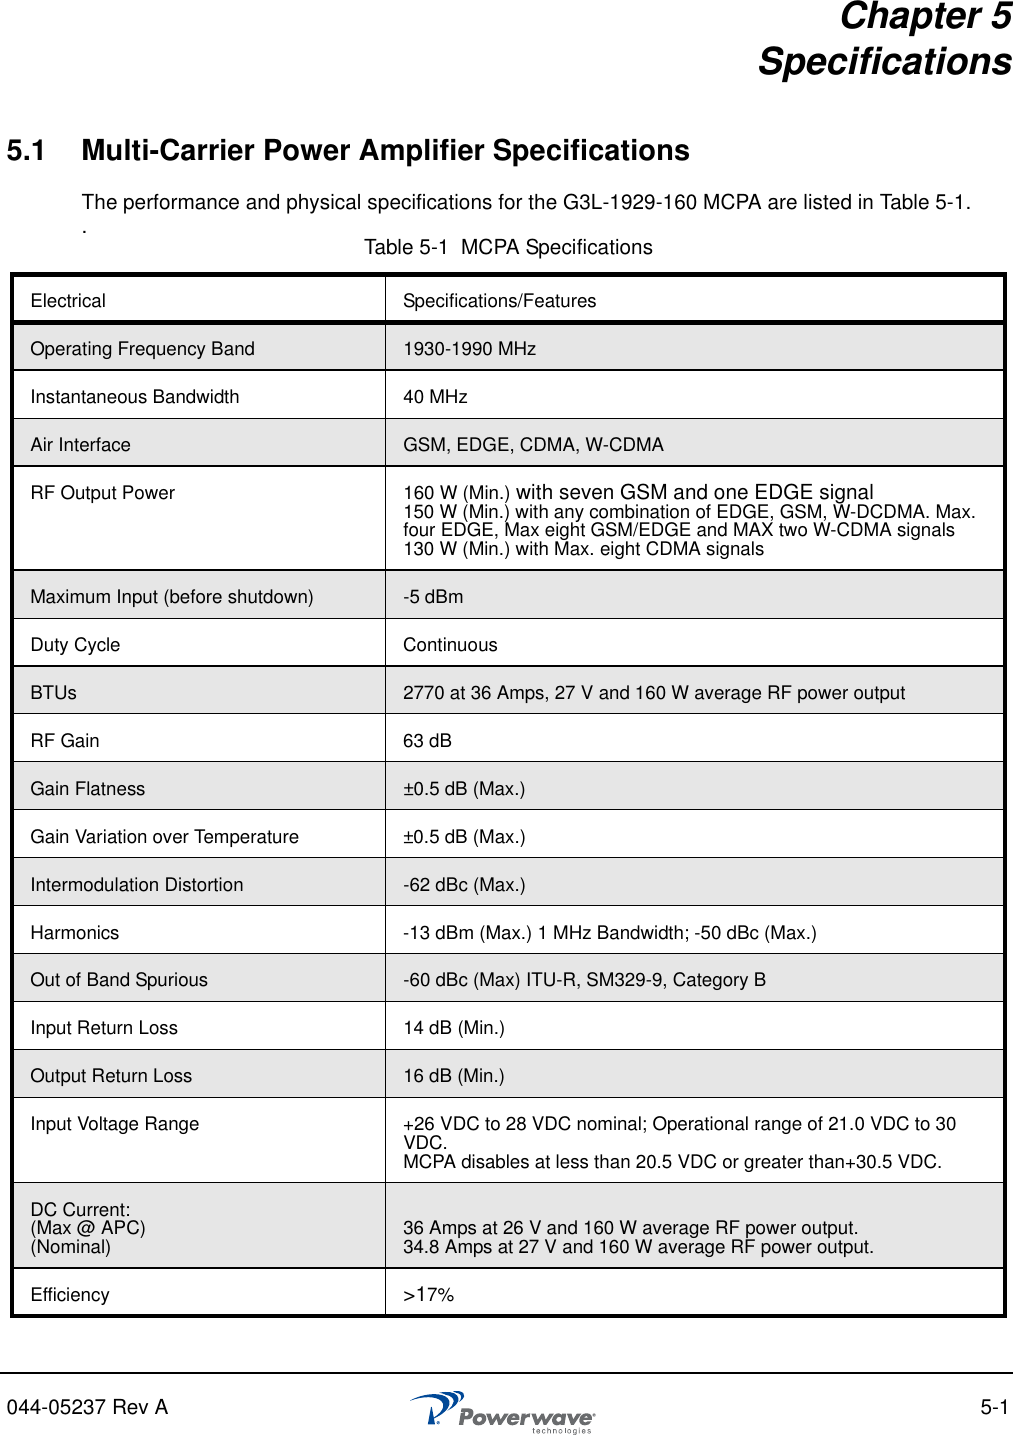 044-05237 Rev A 5-1Chapter 5Specifications5.1 Multi-Carrier Power Amplifier SpecificationsThe performance and physical specifications for the G3L-1929-160 MCPA are listed in Table 5-1..Table 5-1  MCPA SpecificationsElectrical Specifications/FeaturesOperating Frequency Band 1930-1990 MHzInstantaneous Bandwidth 40 MHzAir Interface GSM, EDGE, CDMA, W-CDMARF Output Power 160 W (Min.) with seven GSM and one EDGE signal150 W (Min.) with any combination of EDGE, GSM, W-DCDMA. Max. four EDGE, Max eight GSM/EDGE and MAX two W-CDMA signals130 W (Min.) with Max. eight CDMA signalsMaximum Input (before shutdown) -5 dBmDuty Cycle ContinuousBTUs 2770 at 36 Amps, 27 V and 160 W average RF power outputRF Gain 63 dBGain Flatness ±0.5 dB (Max.)Gain Variation over Temperature ±0.5 dB (Max.)Intermodulation Distortion -62 dBc (Max.)Harmonics -13 dBm (Max.) 1 MHz Bandwidth; -50 dBc (Max.)Out of Band Spurious -60 dBc (Max) ITU-R, SM329-9, Category BInput Return Loss 14 dB (Min.)Output Return Loss 16 dB (Min.)Input Voltage Range  +26 VDC to 28 VDC nominal; Operational range of 21.0 VDC to 30 VDC.MCPA disables at less than 20.5 VDC or greater than+30.5 VDC.DC Current:(Max @ APC)(Nominal) 36 Amps at 26 V and 160 W average RF power output.34.8 Amps at 27 V and 160 W average RF power output.Efficiency &gt;17%